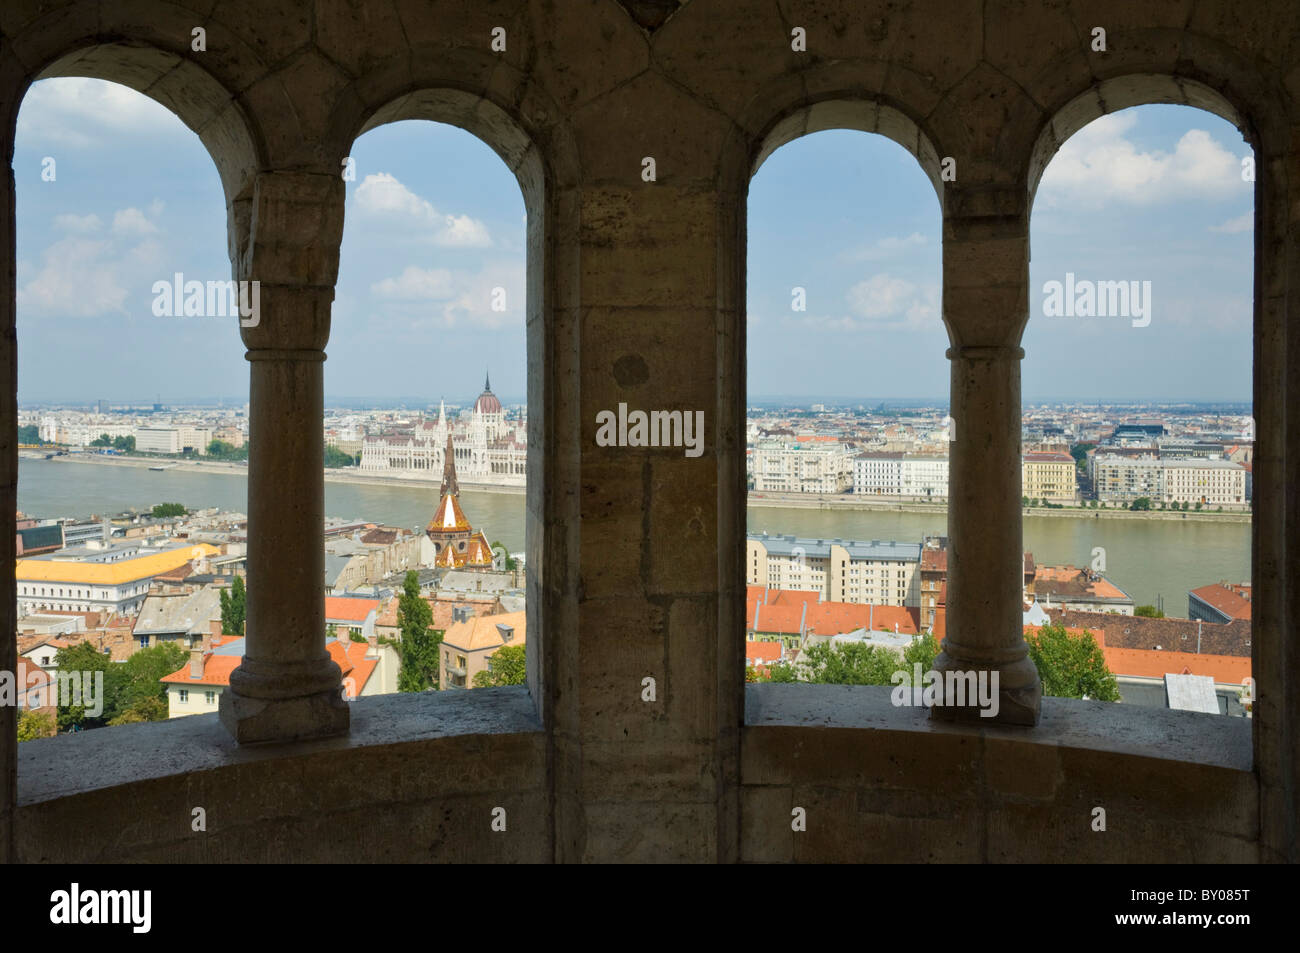 Arches of the Fishermen's Bastion with the Hungarian Parliament building and river Danube Budapest, Hungary, Europe, EU Stock Photo